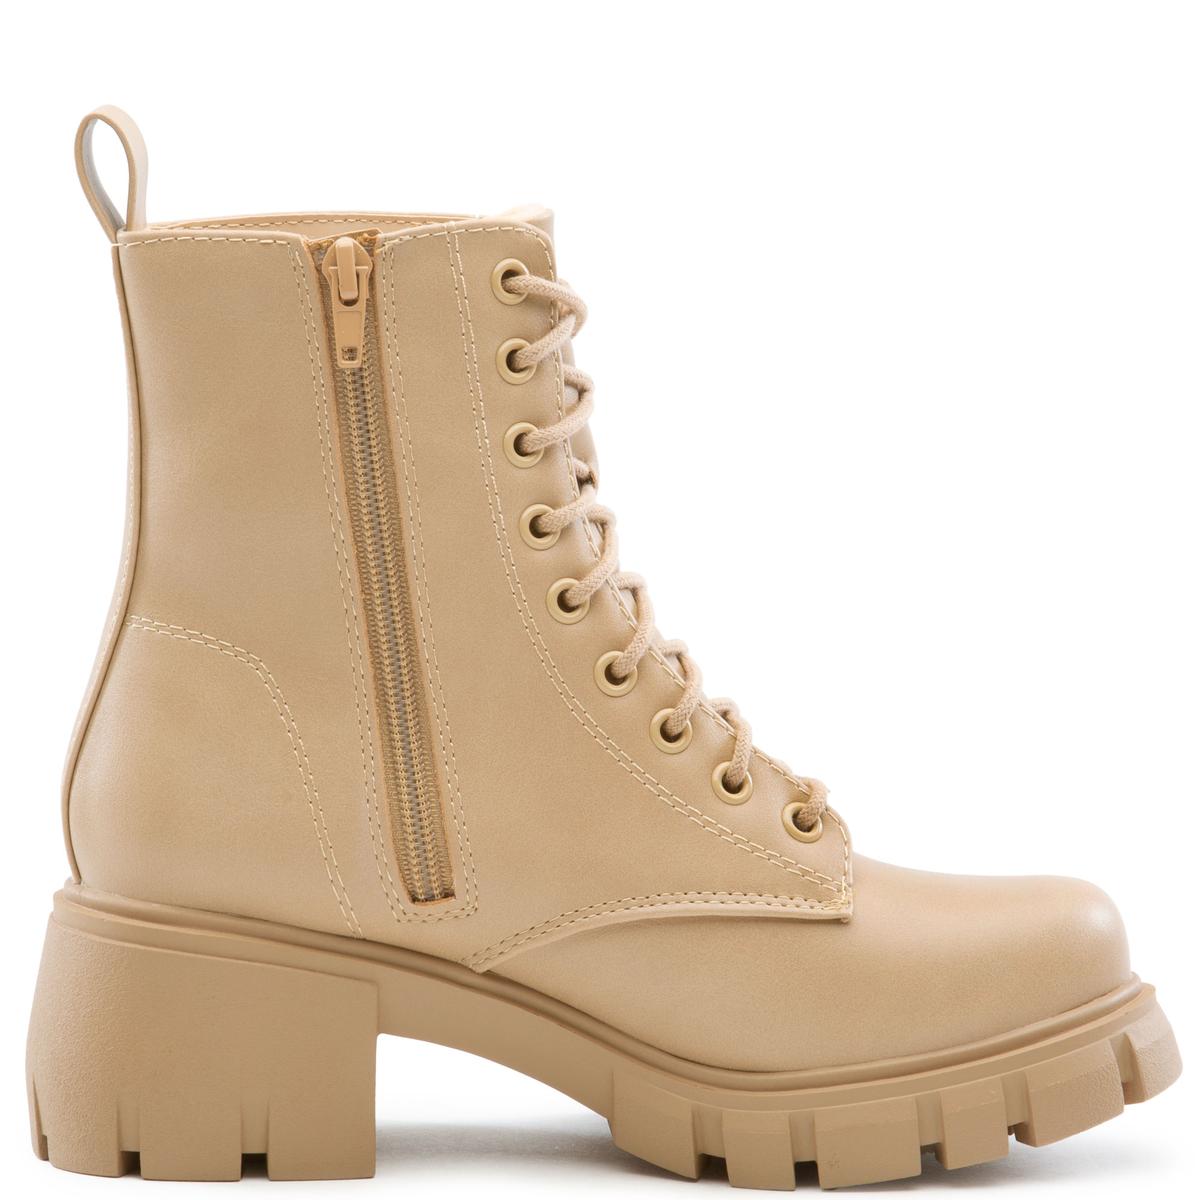 Tundra-s Lace Up Bootie